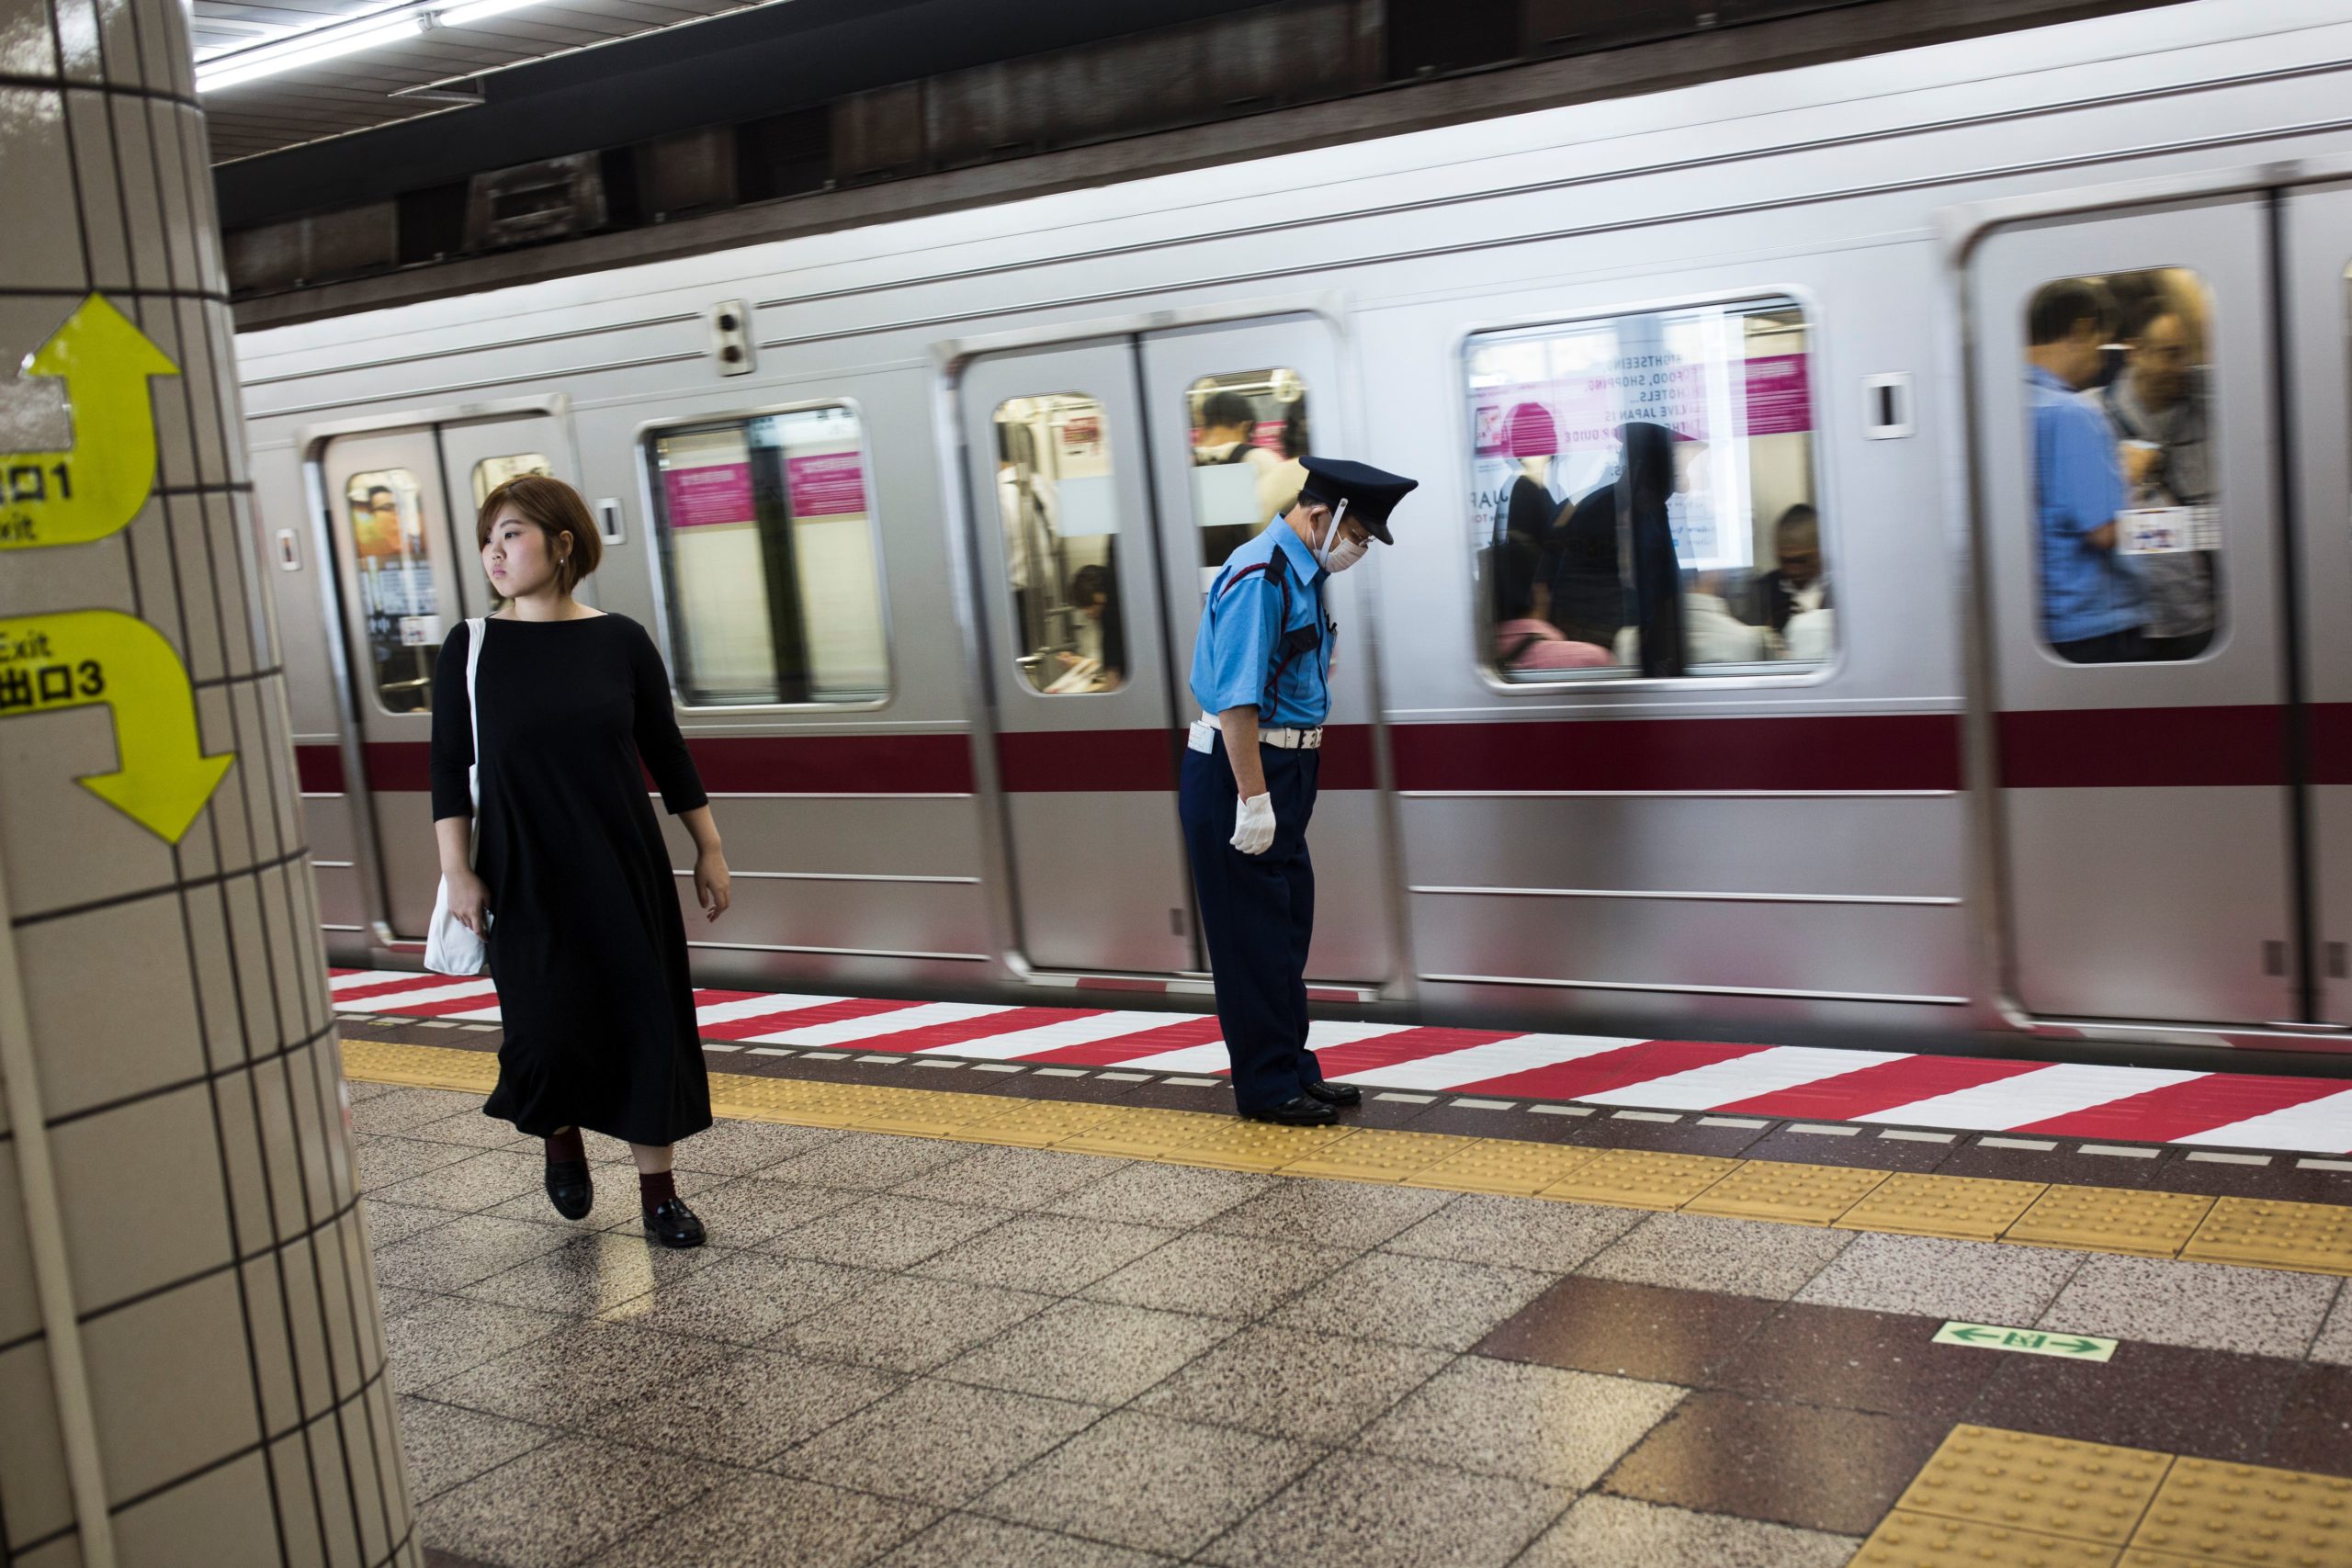 A Japanese subway employee bows next to a train after a safety check in a subway station in central Tokyo on October 12, 2016. / AFP / BEHROUZ MEHRI (Photo credit should read BEHROUZ MEHRI/AFP via Getty Images)